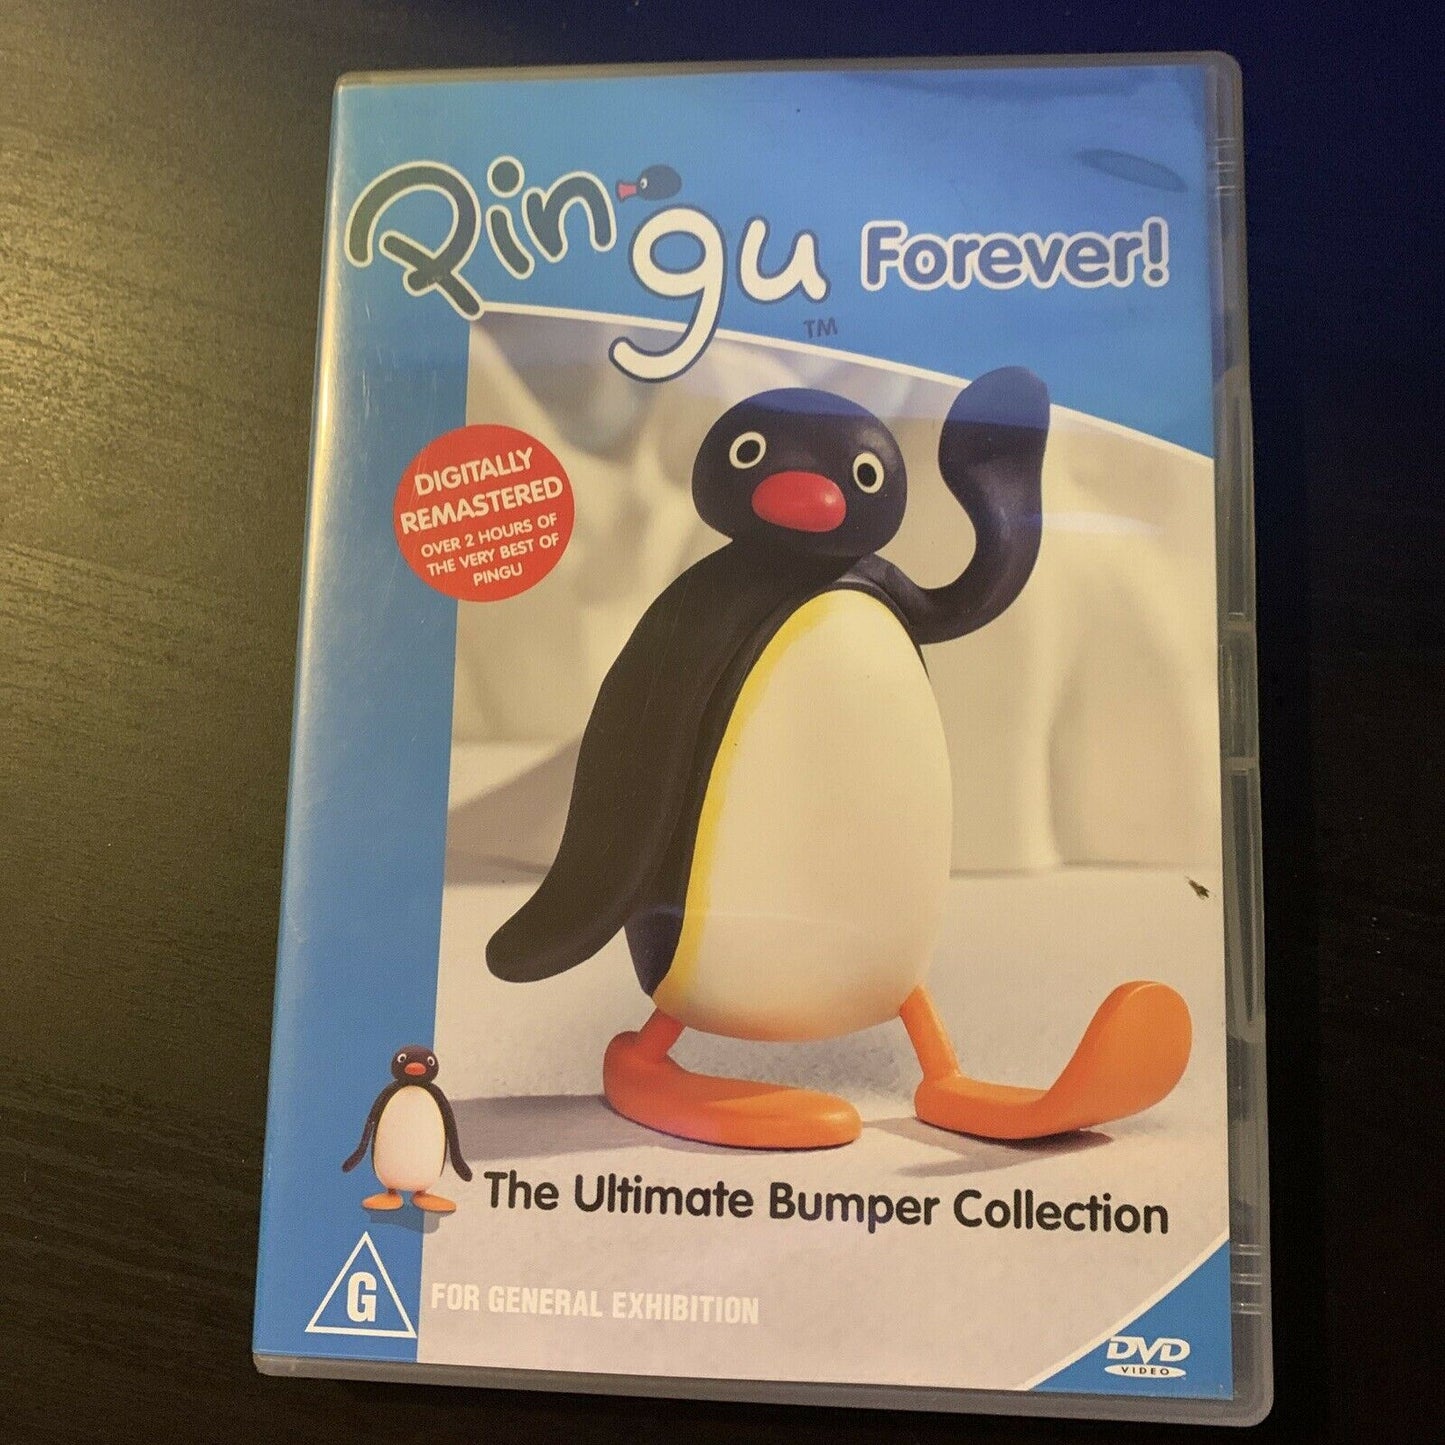 Pingu Forever - The Ultimate Bumper Collection (DVD, 2004) Region 4